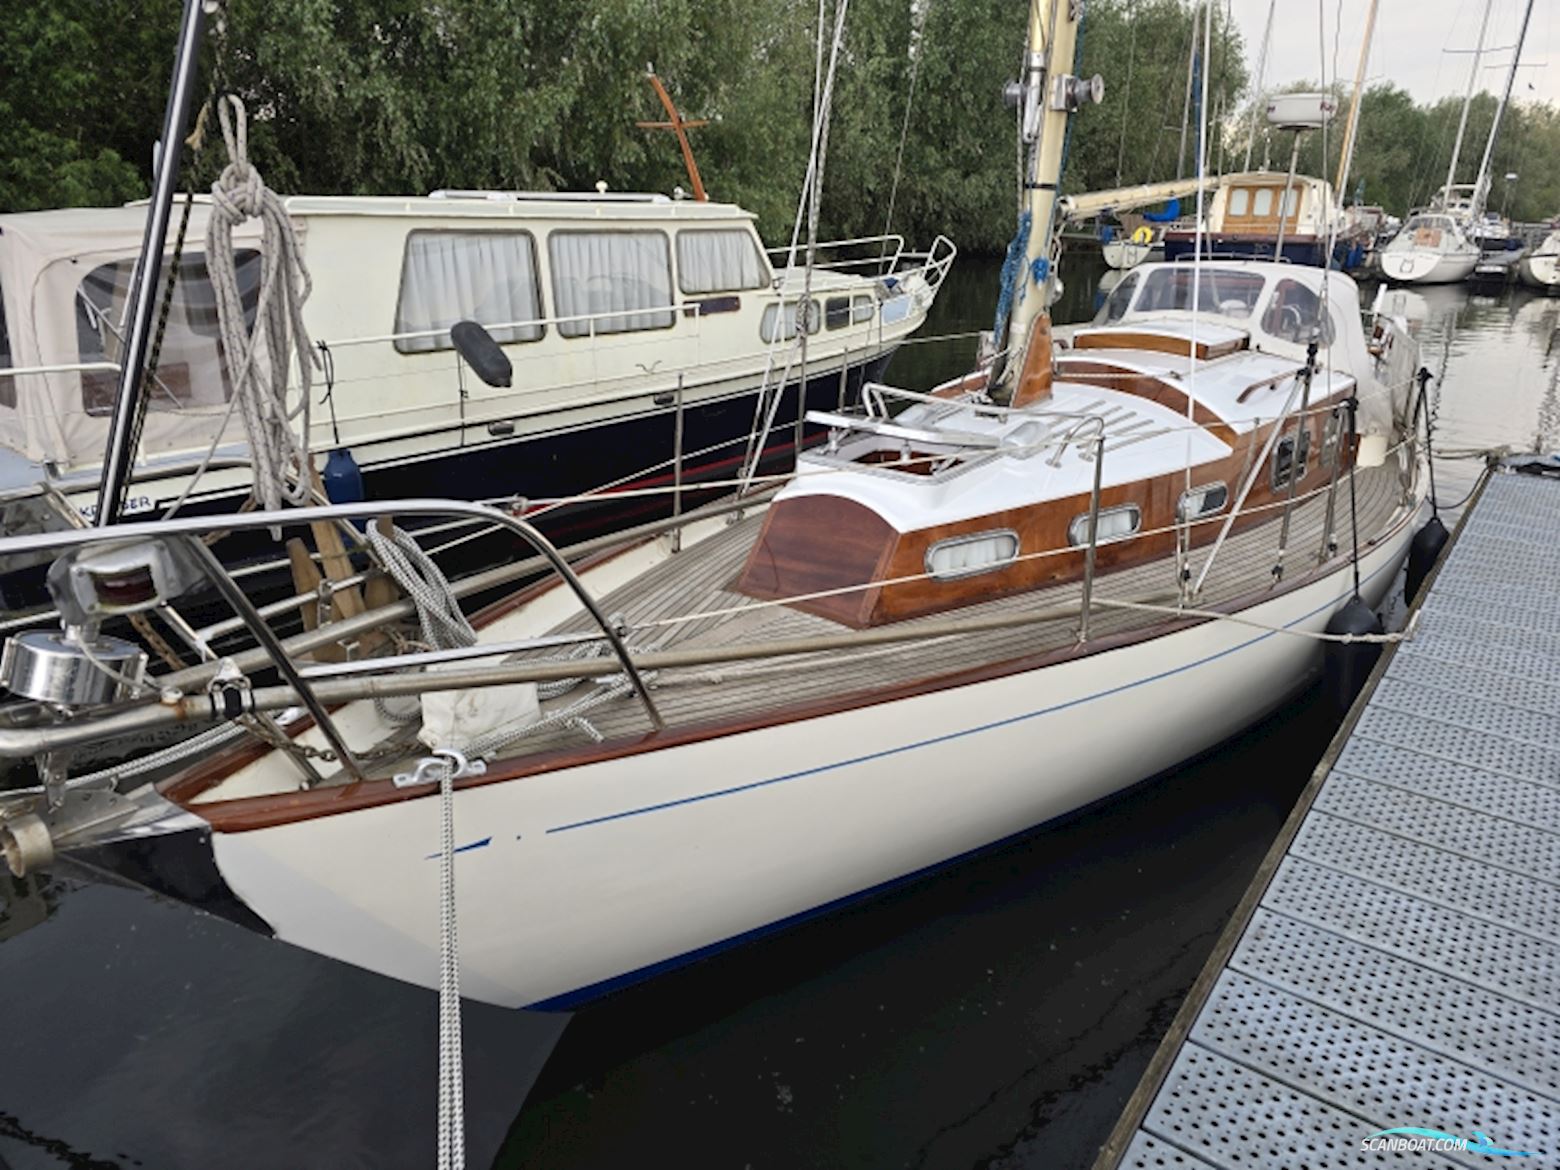 Trintella Iia Sailing boat 1971, with Lister Petter engine, The Netherlands